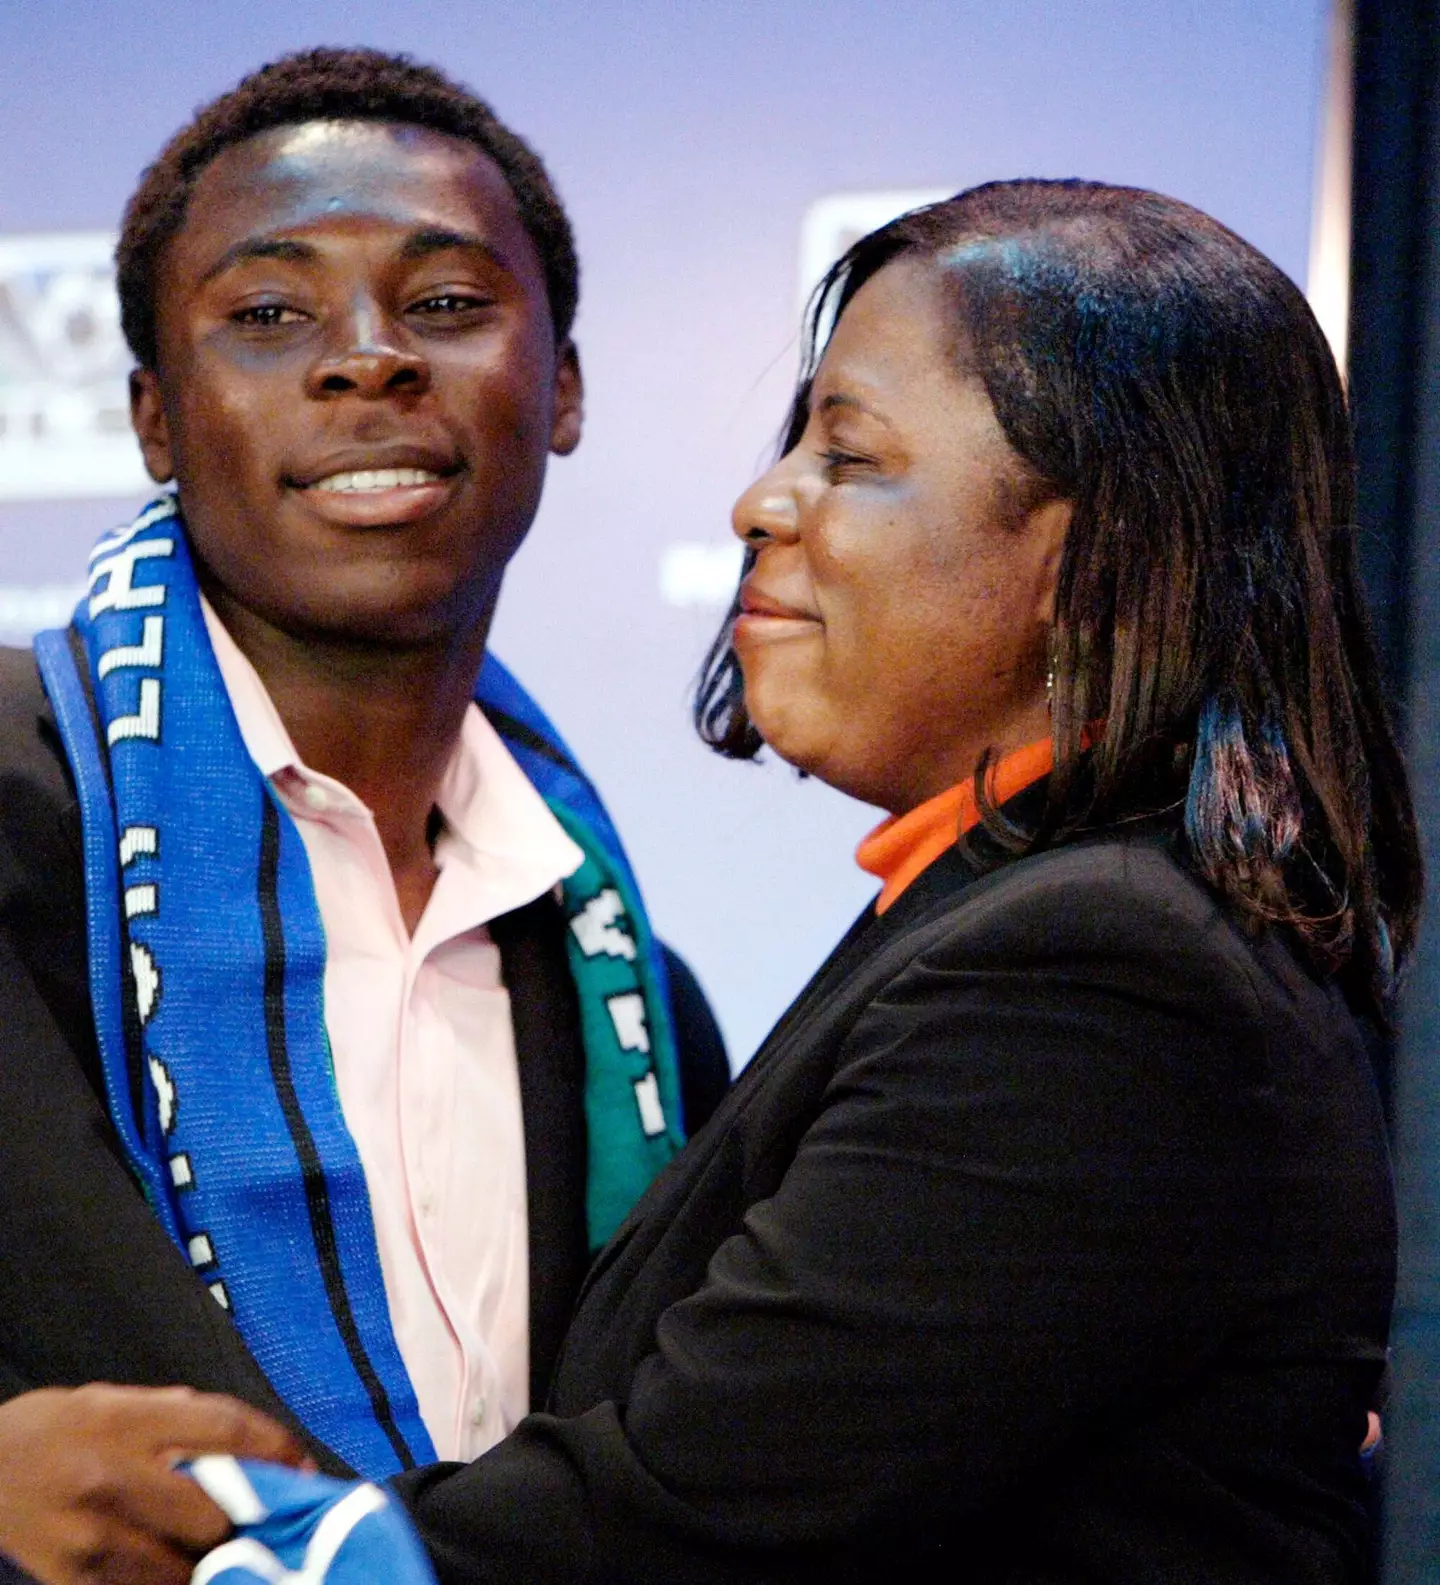 Freddy embraces his mother Emelia at a press conference in New York on November 19, 2003 where it was announced that he had signed a multi-year deal with Major League Soccer. Image credit: Alamy